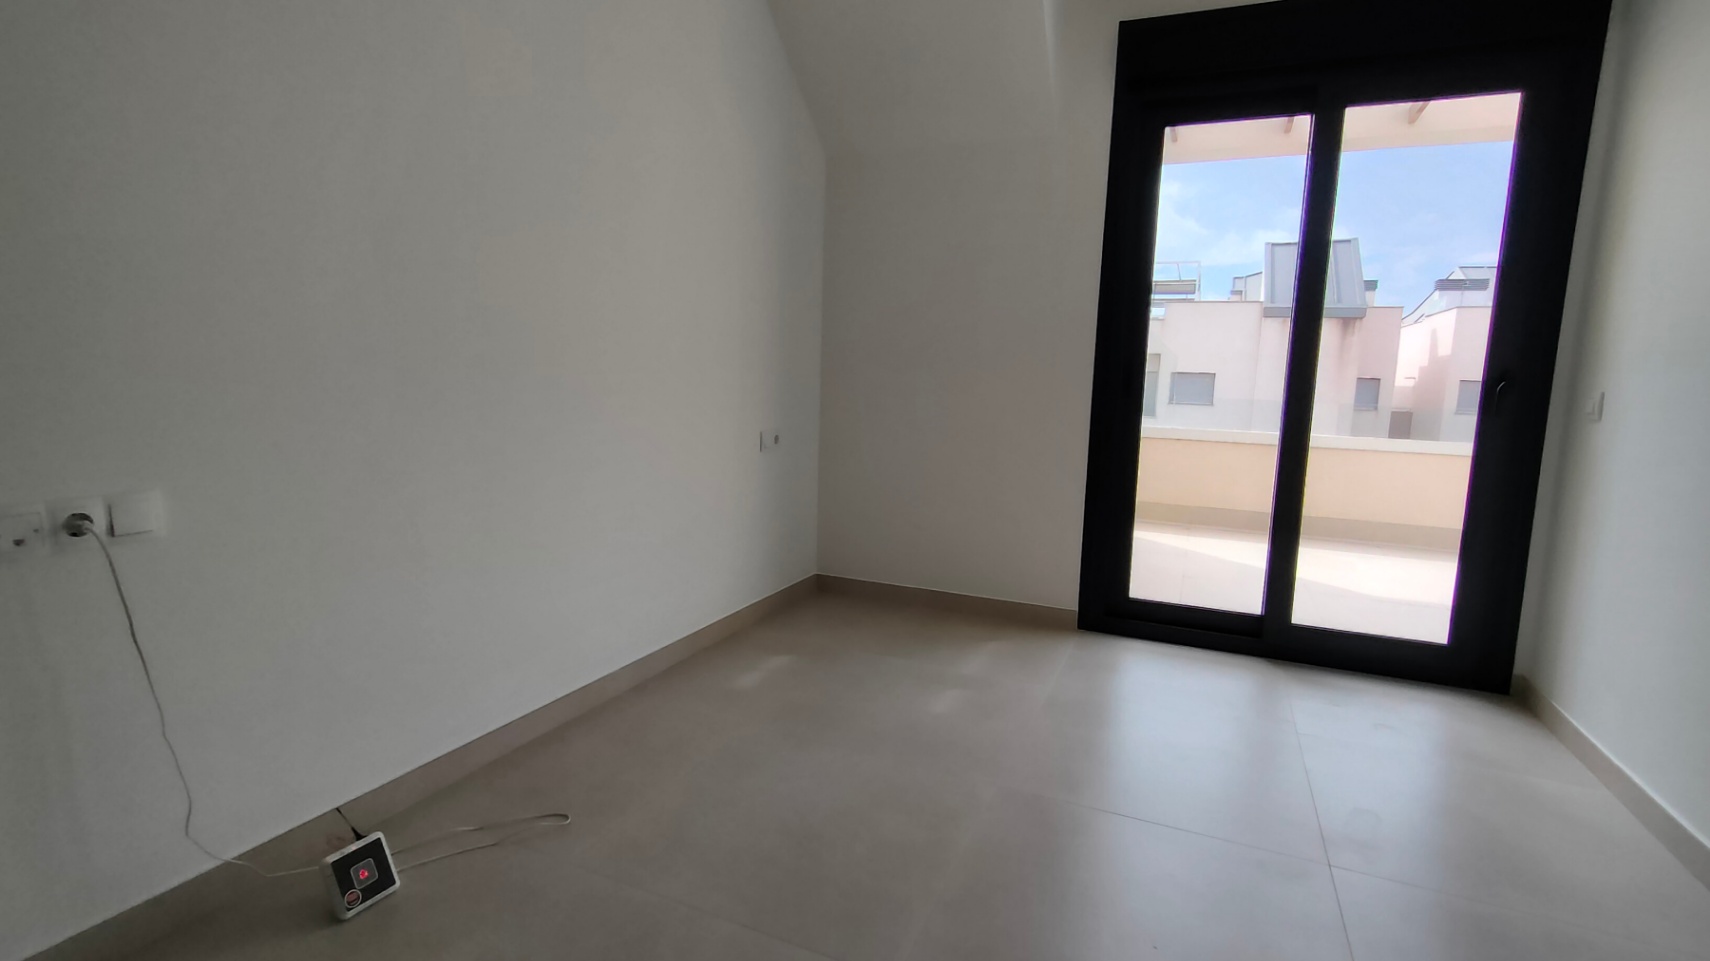 New development, 2 and 3 bedroom homes by the sea on the Costa Blanca, Torrevieja.